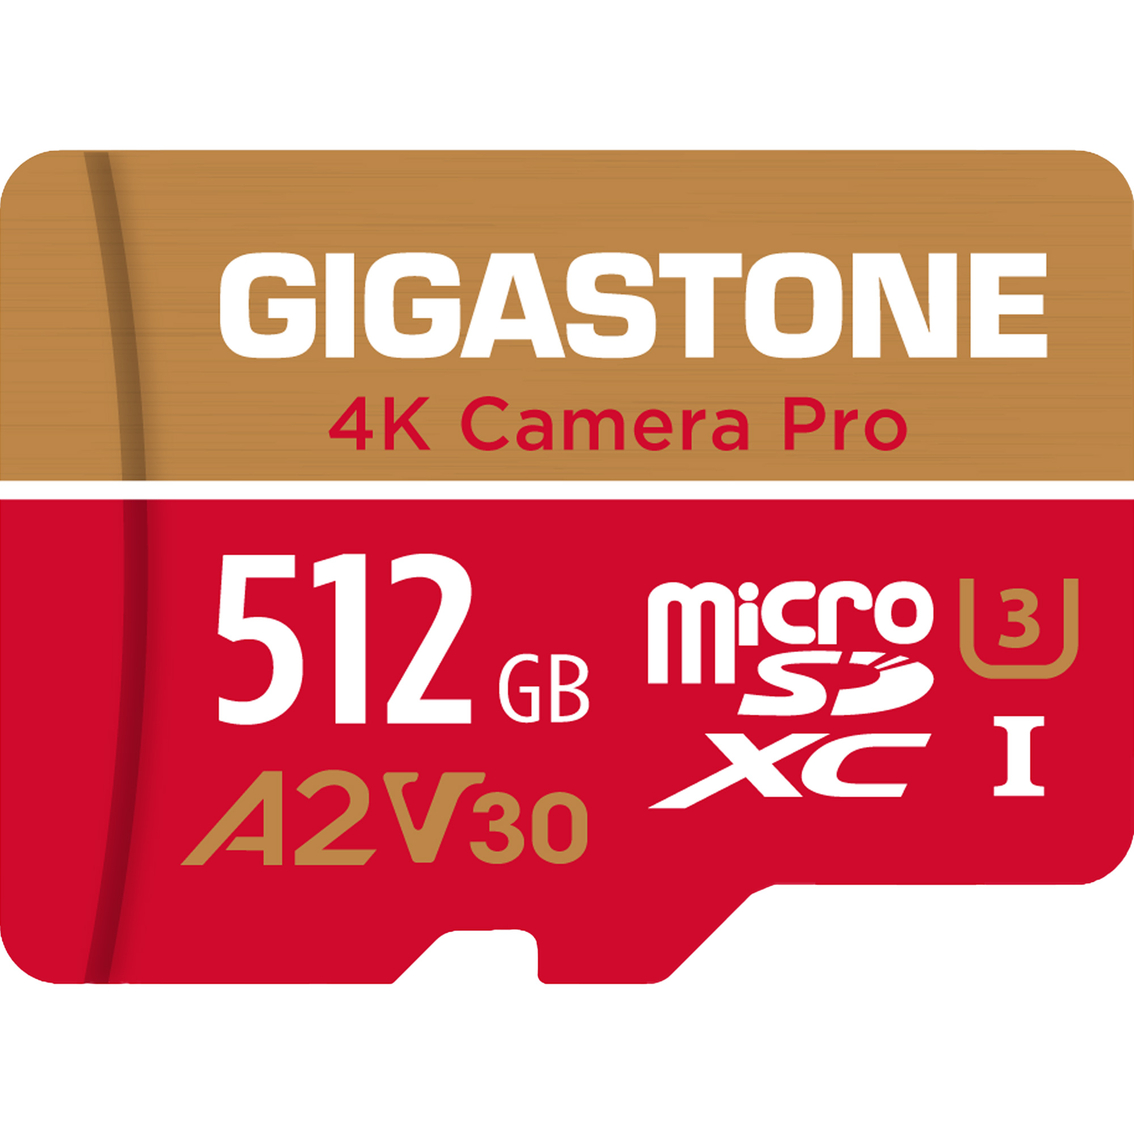 Gigastone MicroSD A2 V30 512GB with SD Adapter - Image 2 of 2